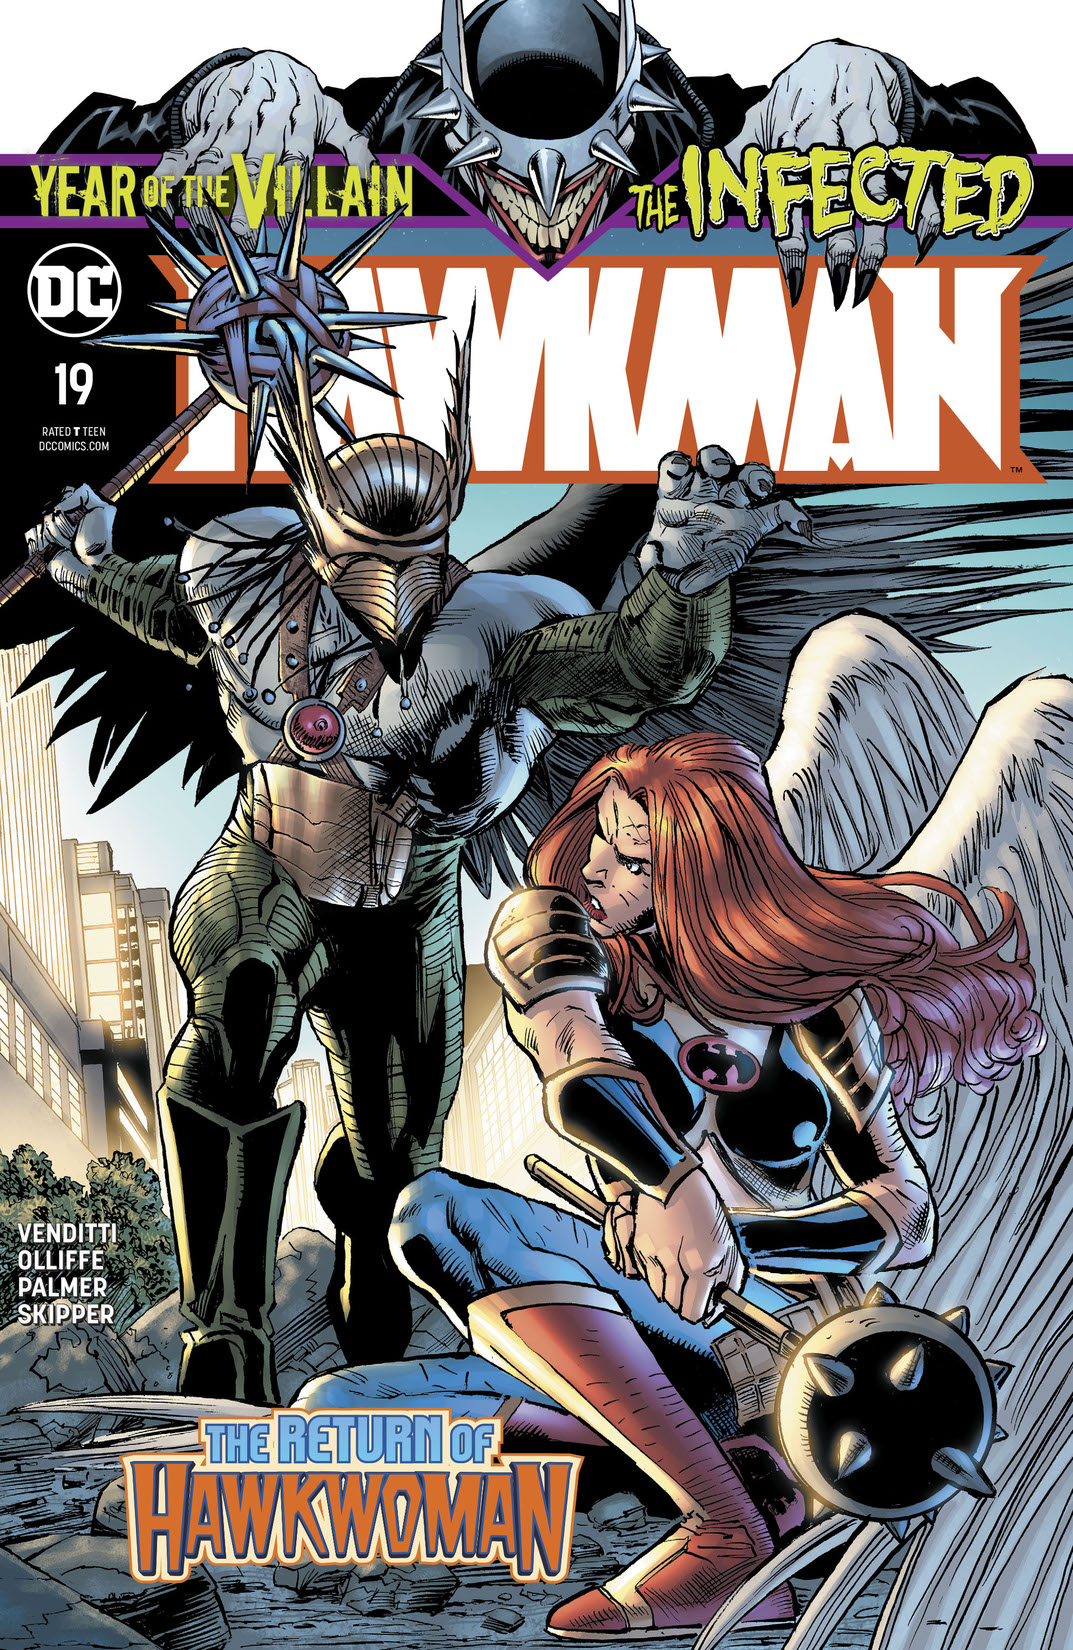 Hawkman (2018-2020) #19 preview images